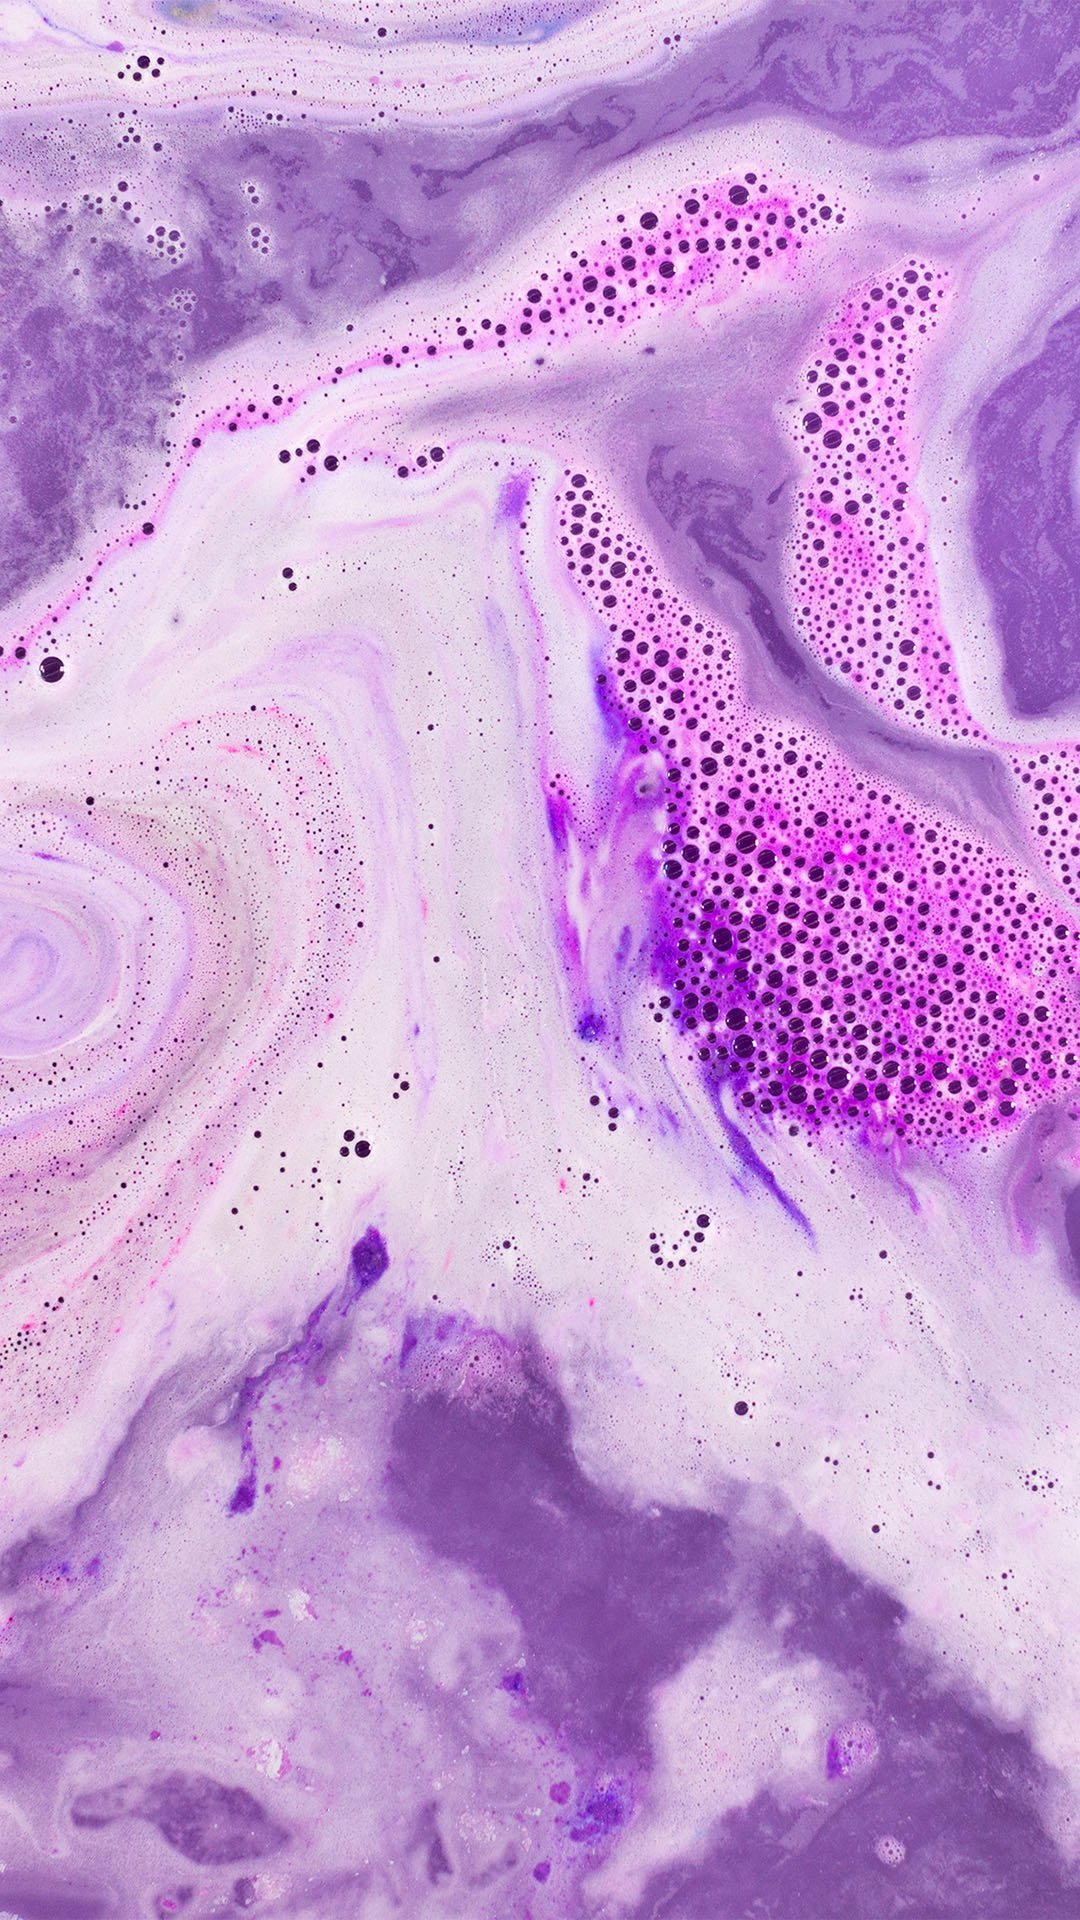 Goddess bath water, purple and lilac and silver and bubbly as can be.